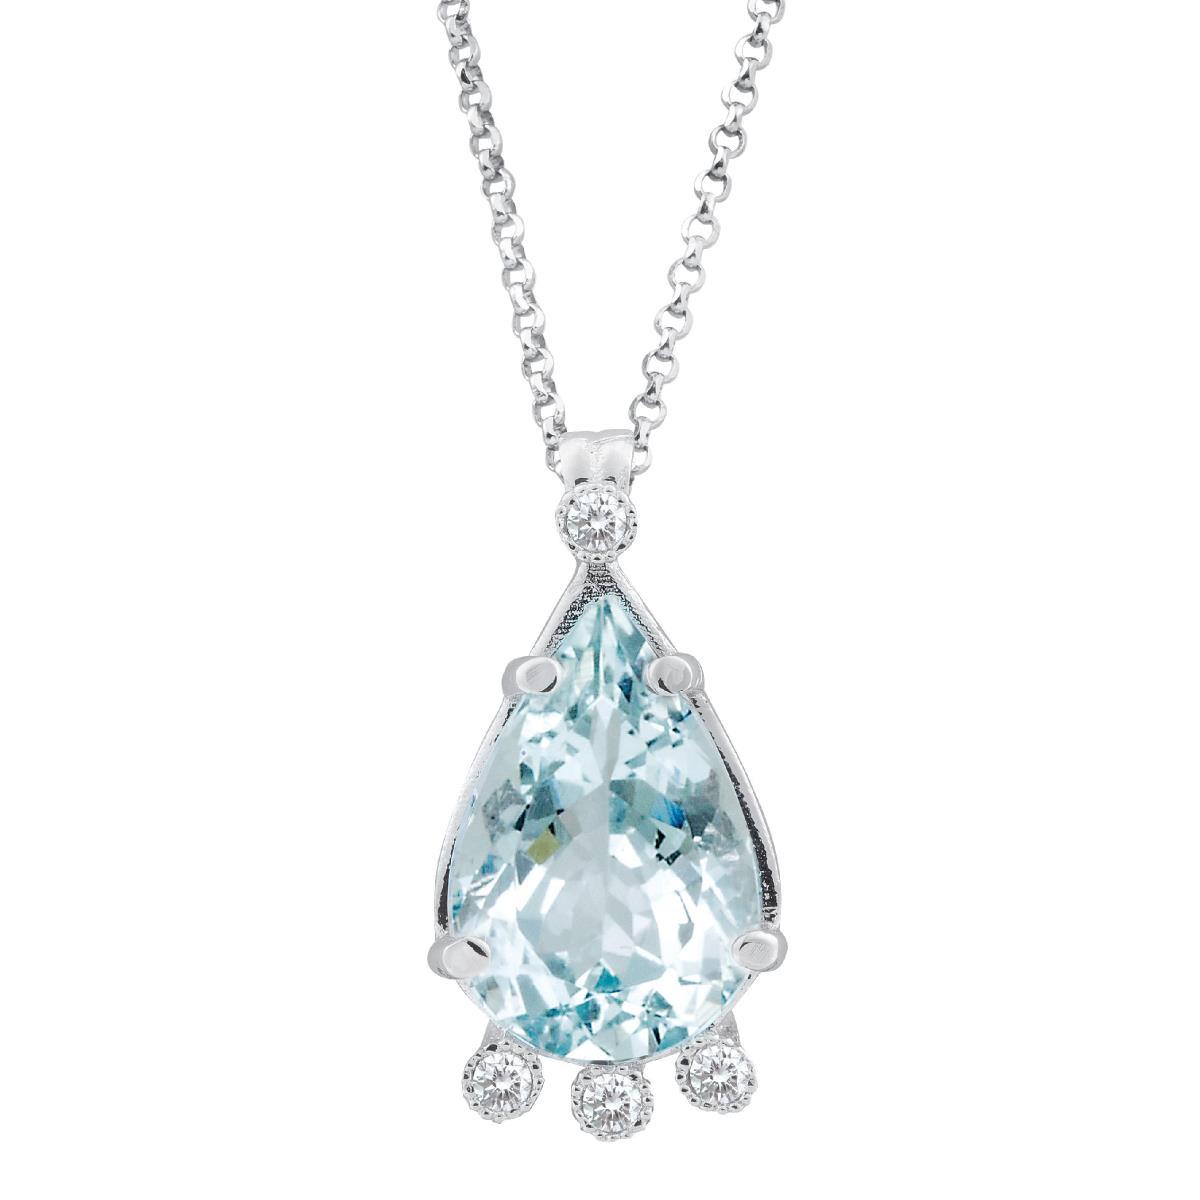 Gold necklace with aquamarine and diamonds - CD311-LB